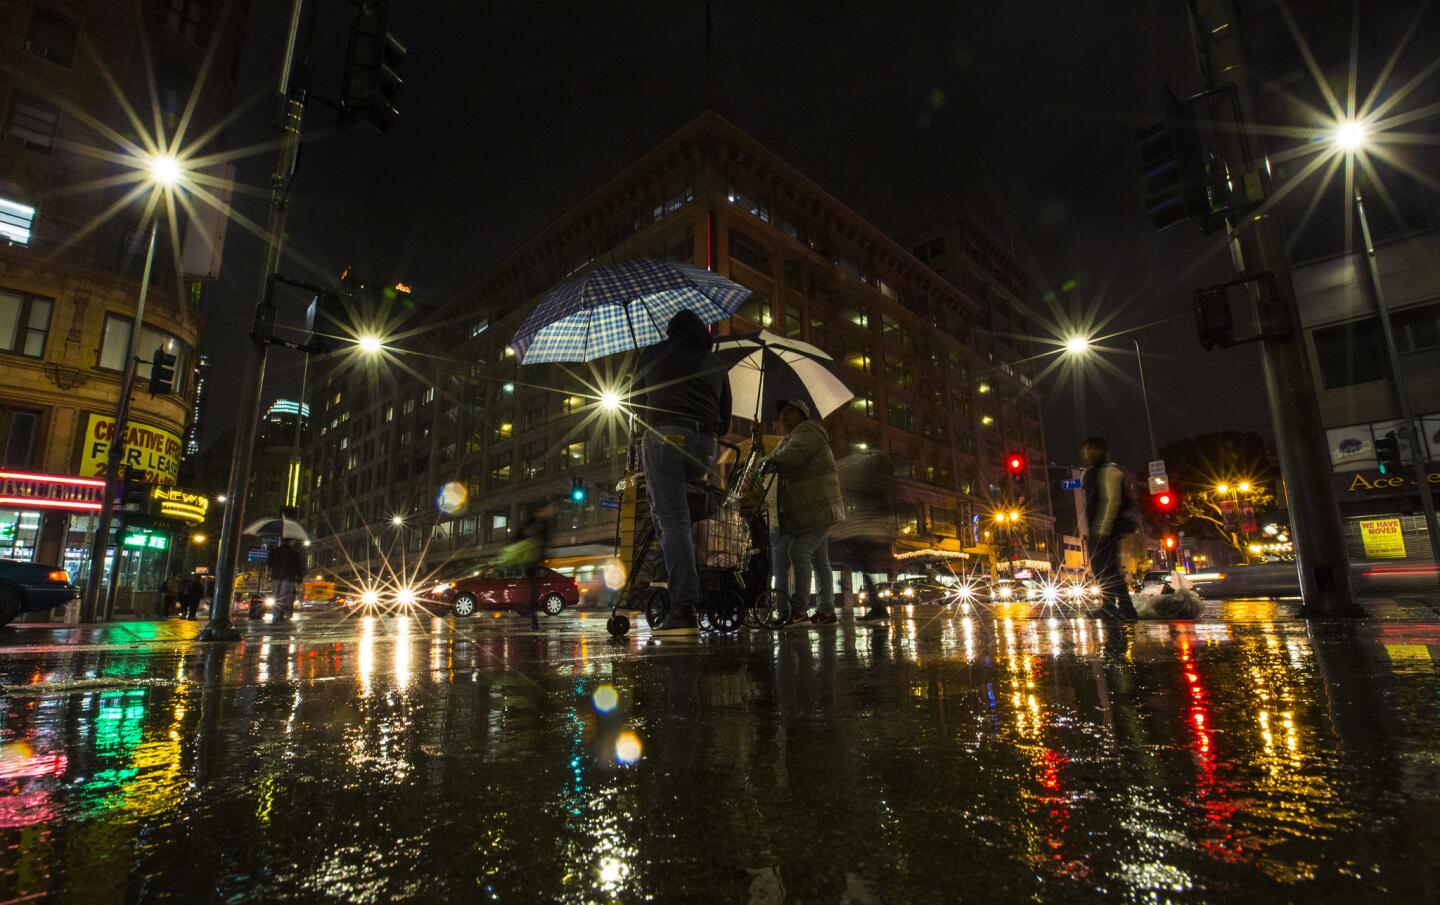 Umbrellas come out as a steady rain falls at 7th Street and Broadway in downtown Los Angeles on Thursday night.